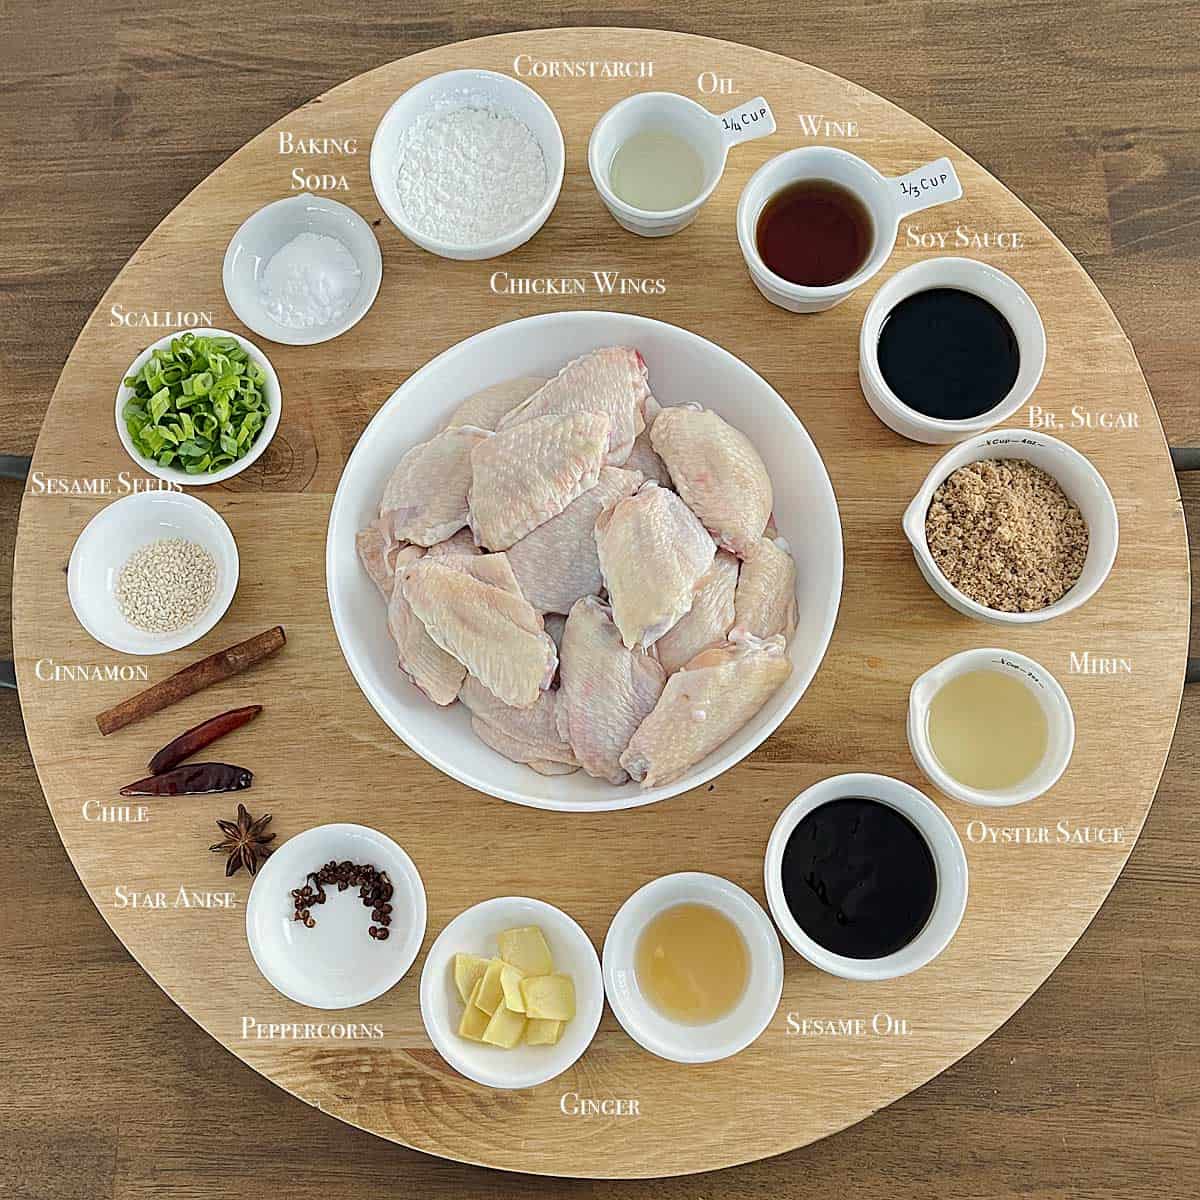 All the ingredients for Chinese Fried Chicken Wings Recipe with Secret Spices.